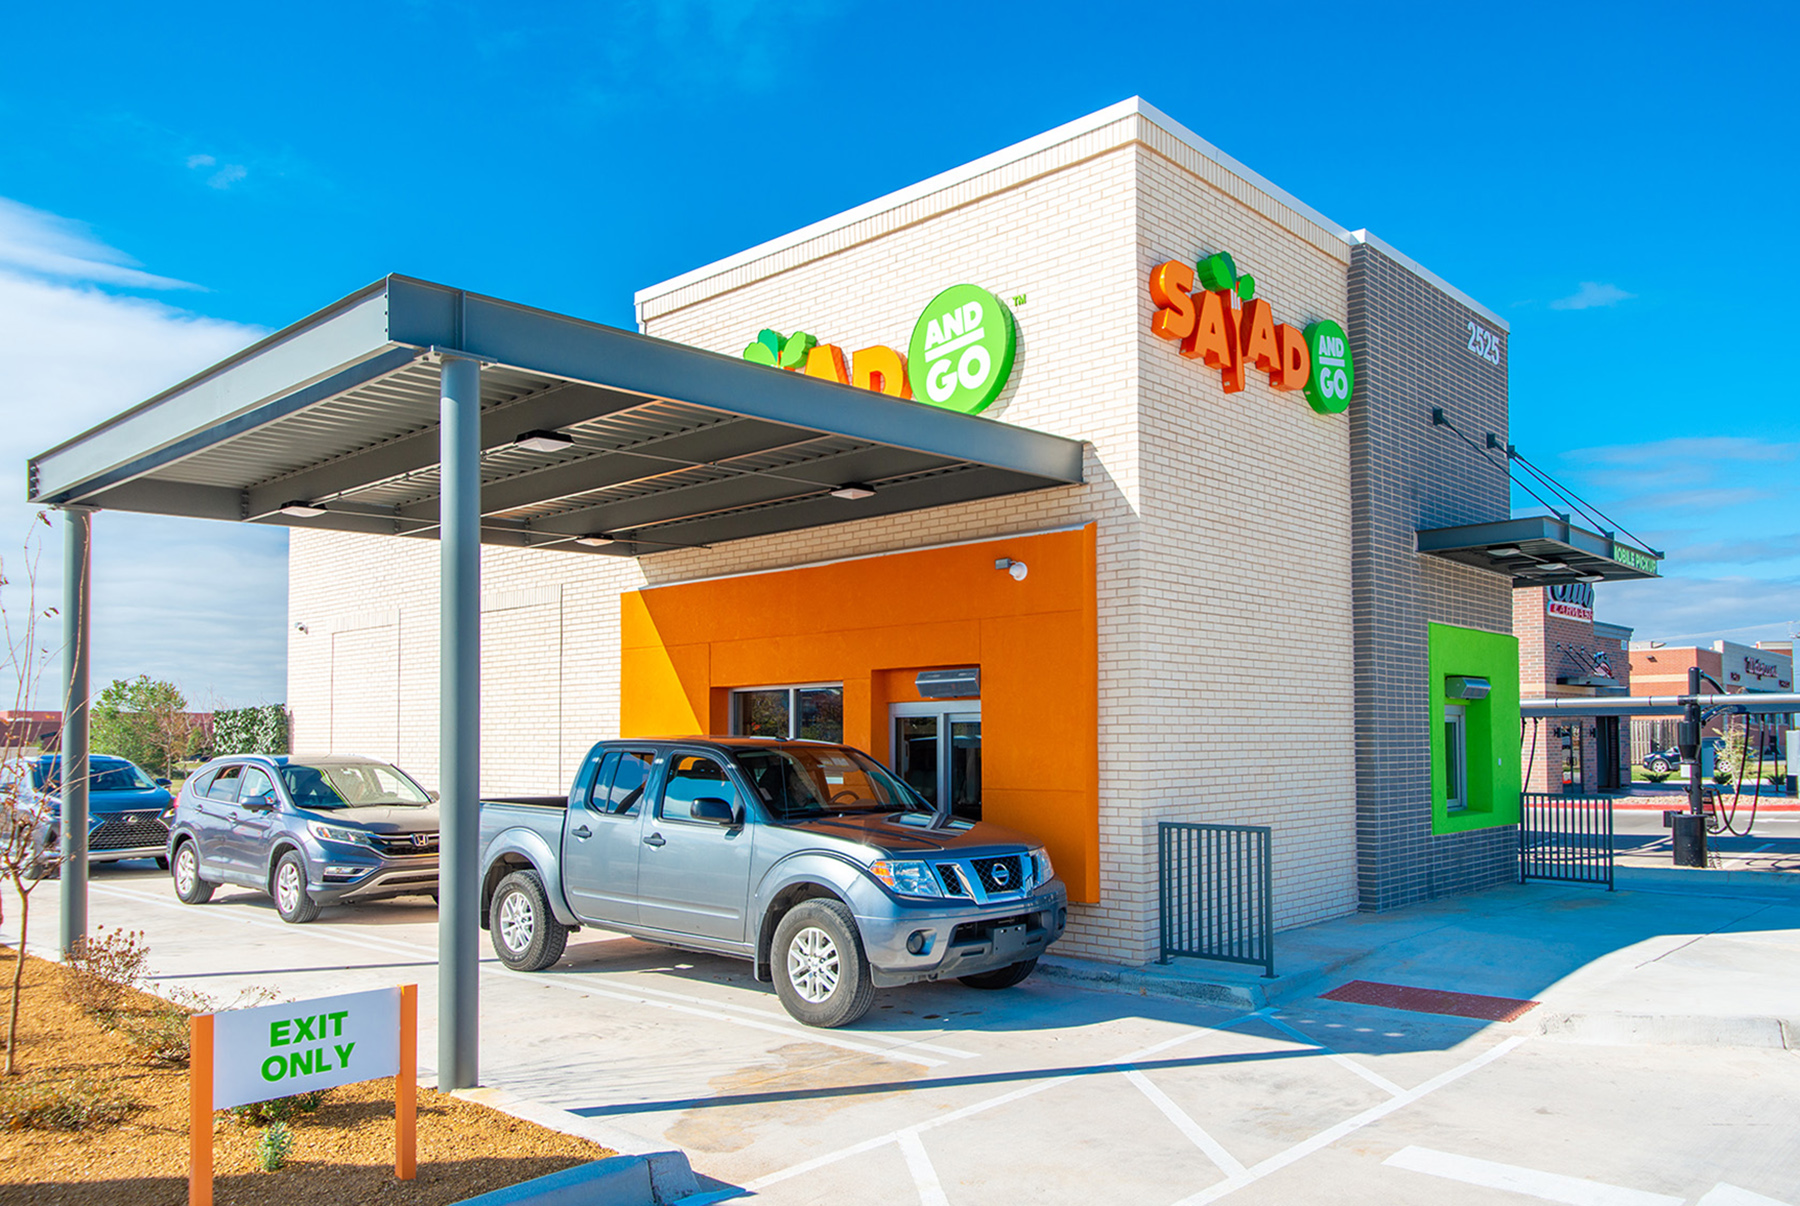 Hanley Investment Group Arranges Sale of New Construction Salad and Go Drive-Thru in Oklahoma City Metro for $1.7 Million